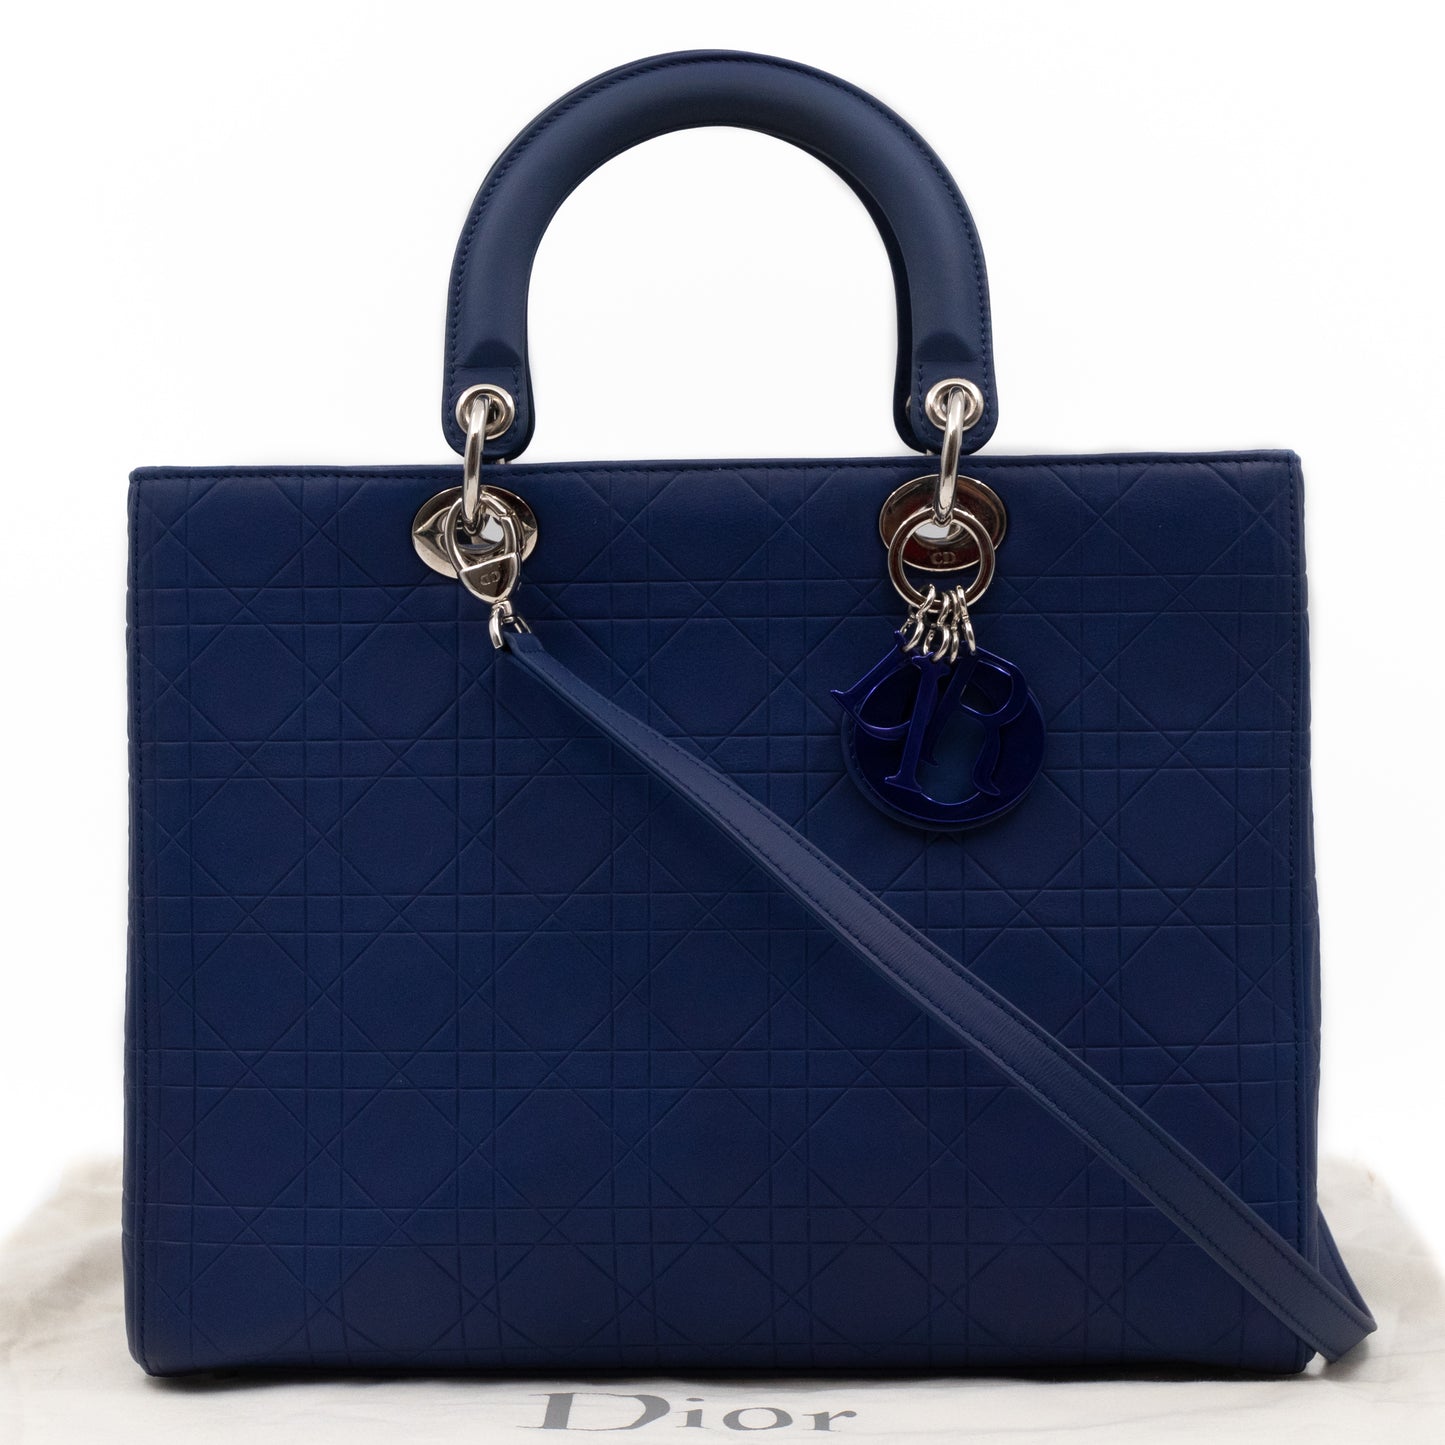 Lady Dior Large Navy Blue Ultra Matte Leather